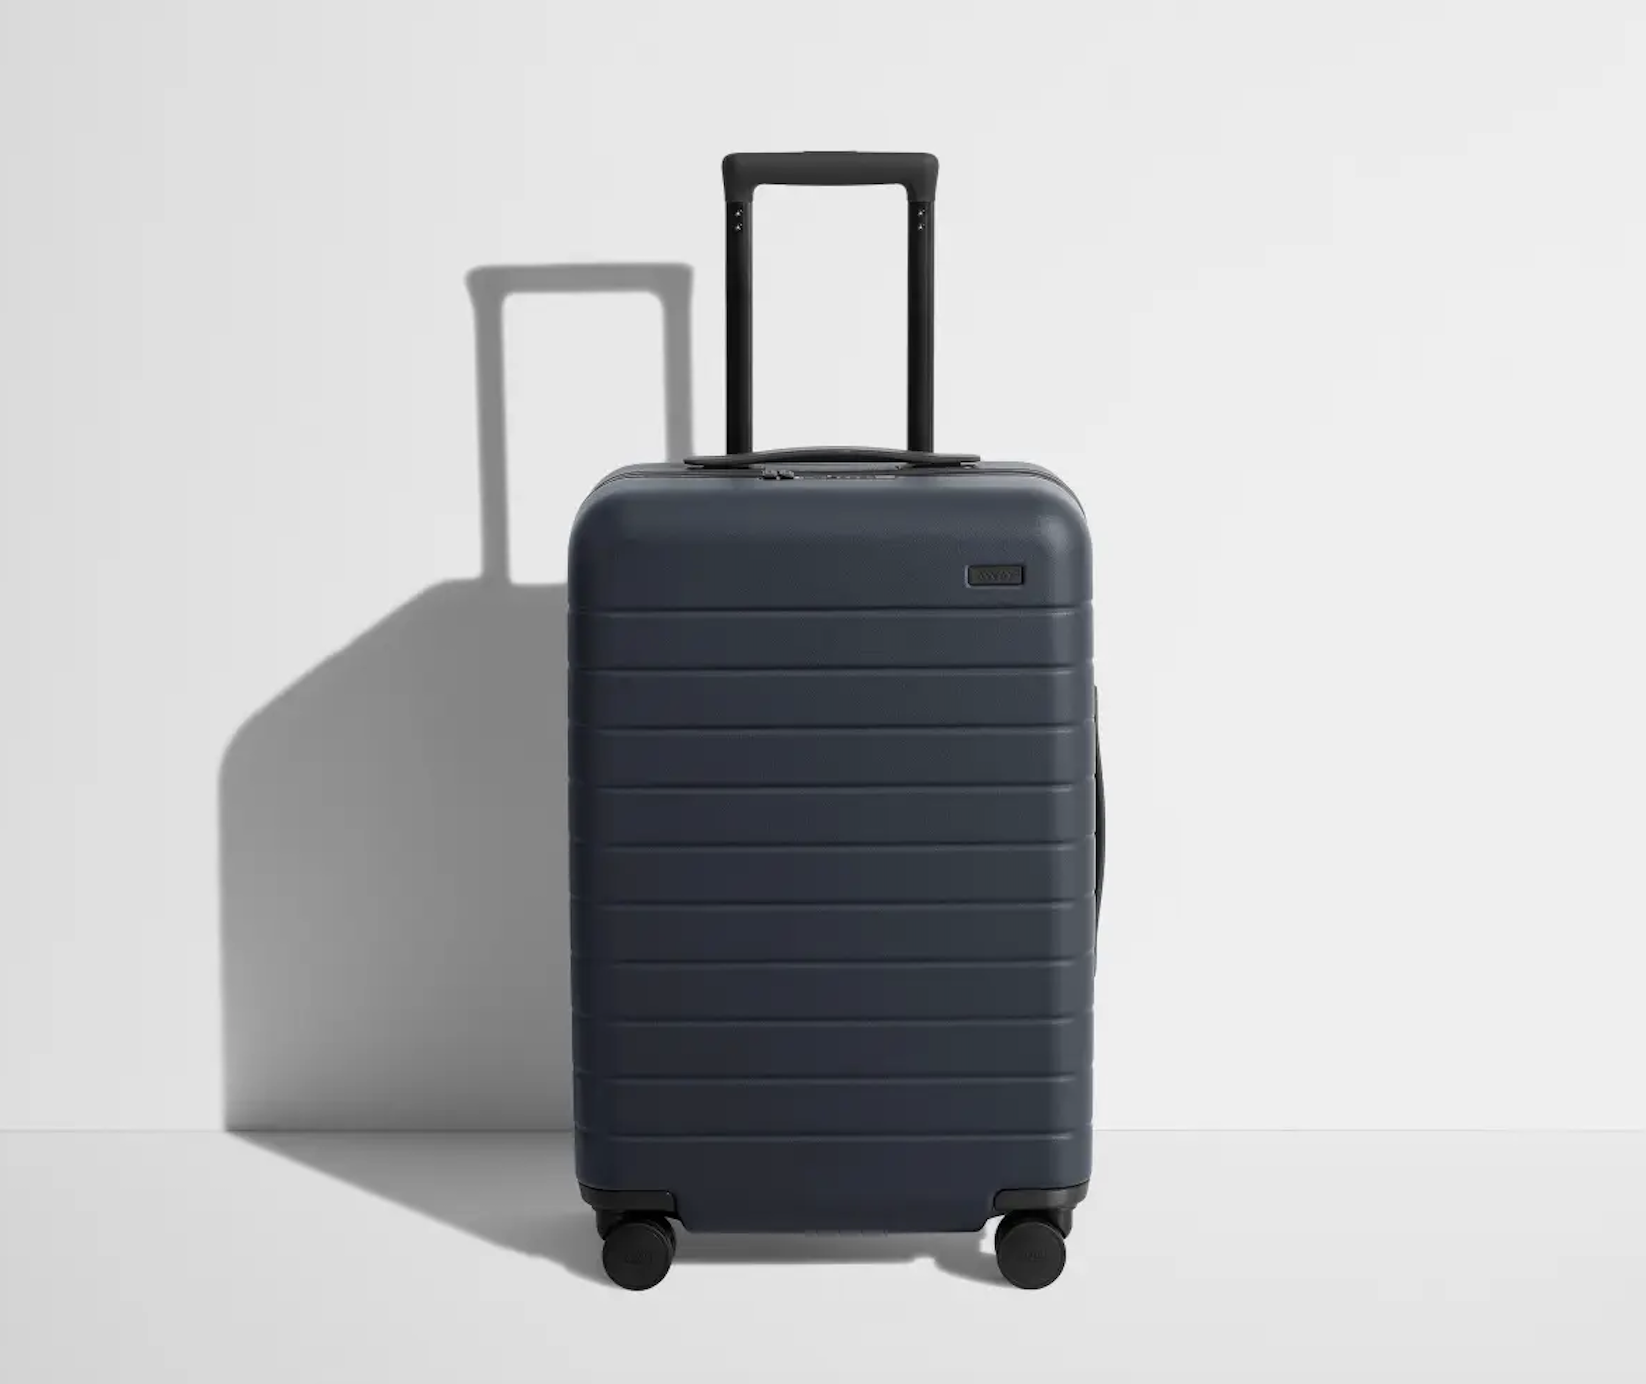 Carry-on Luggage Size by Airline: Ultimate Guide for 2023 | CNN Underscored